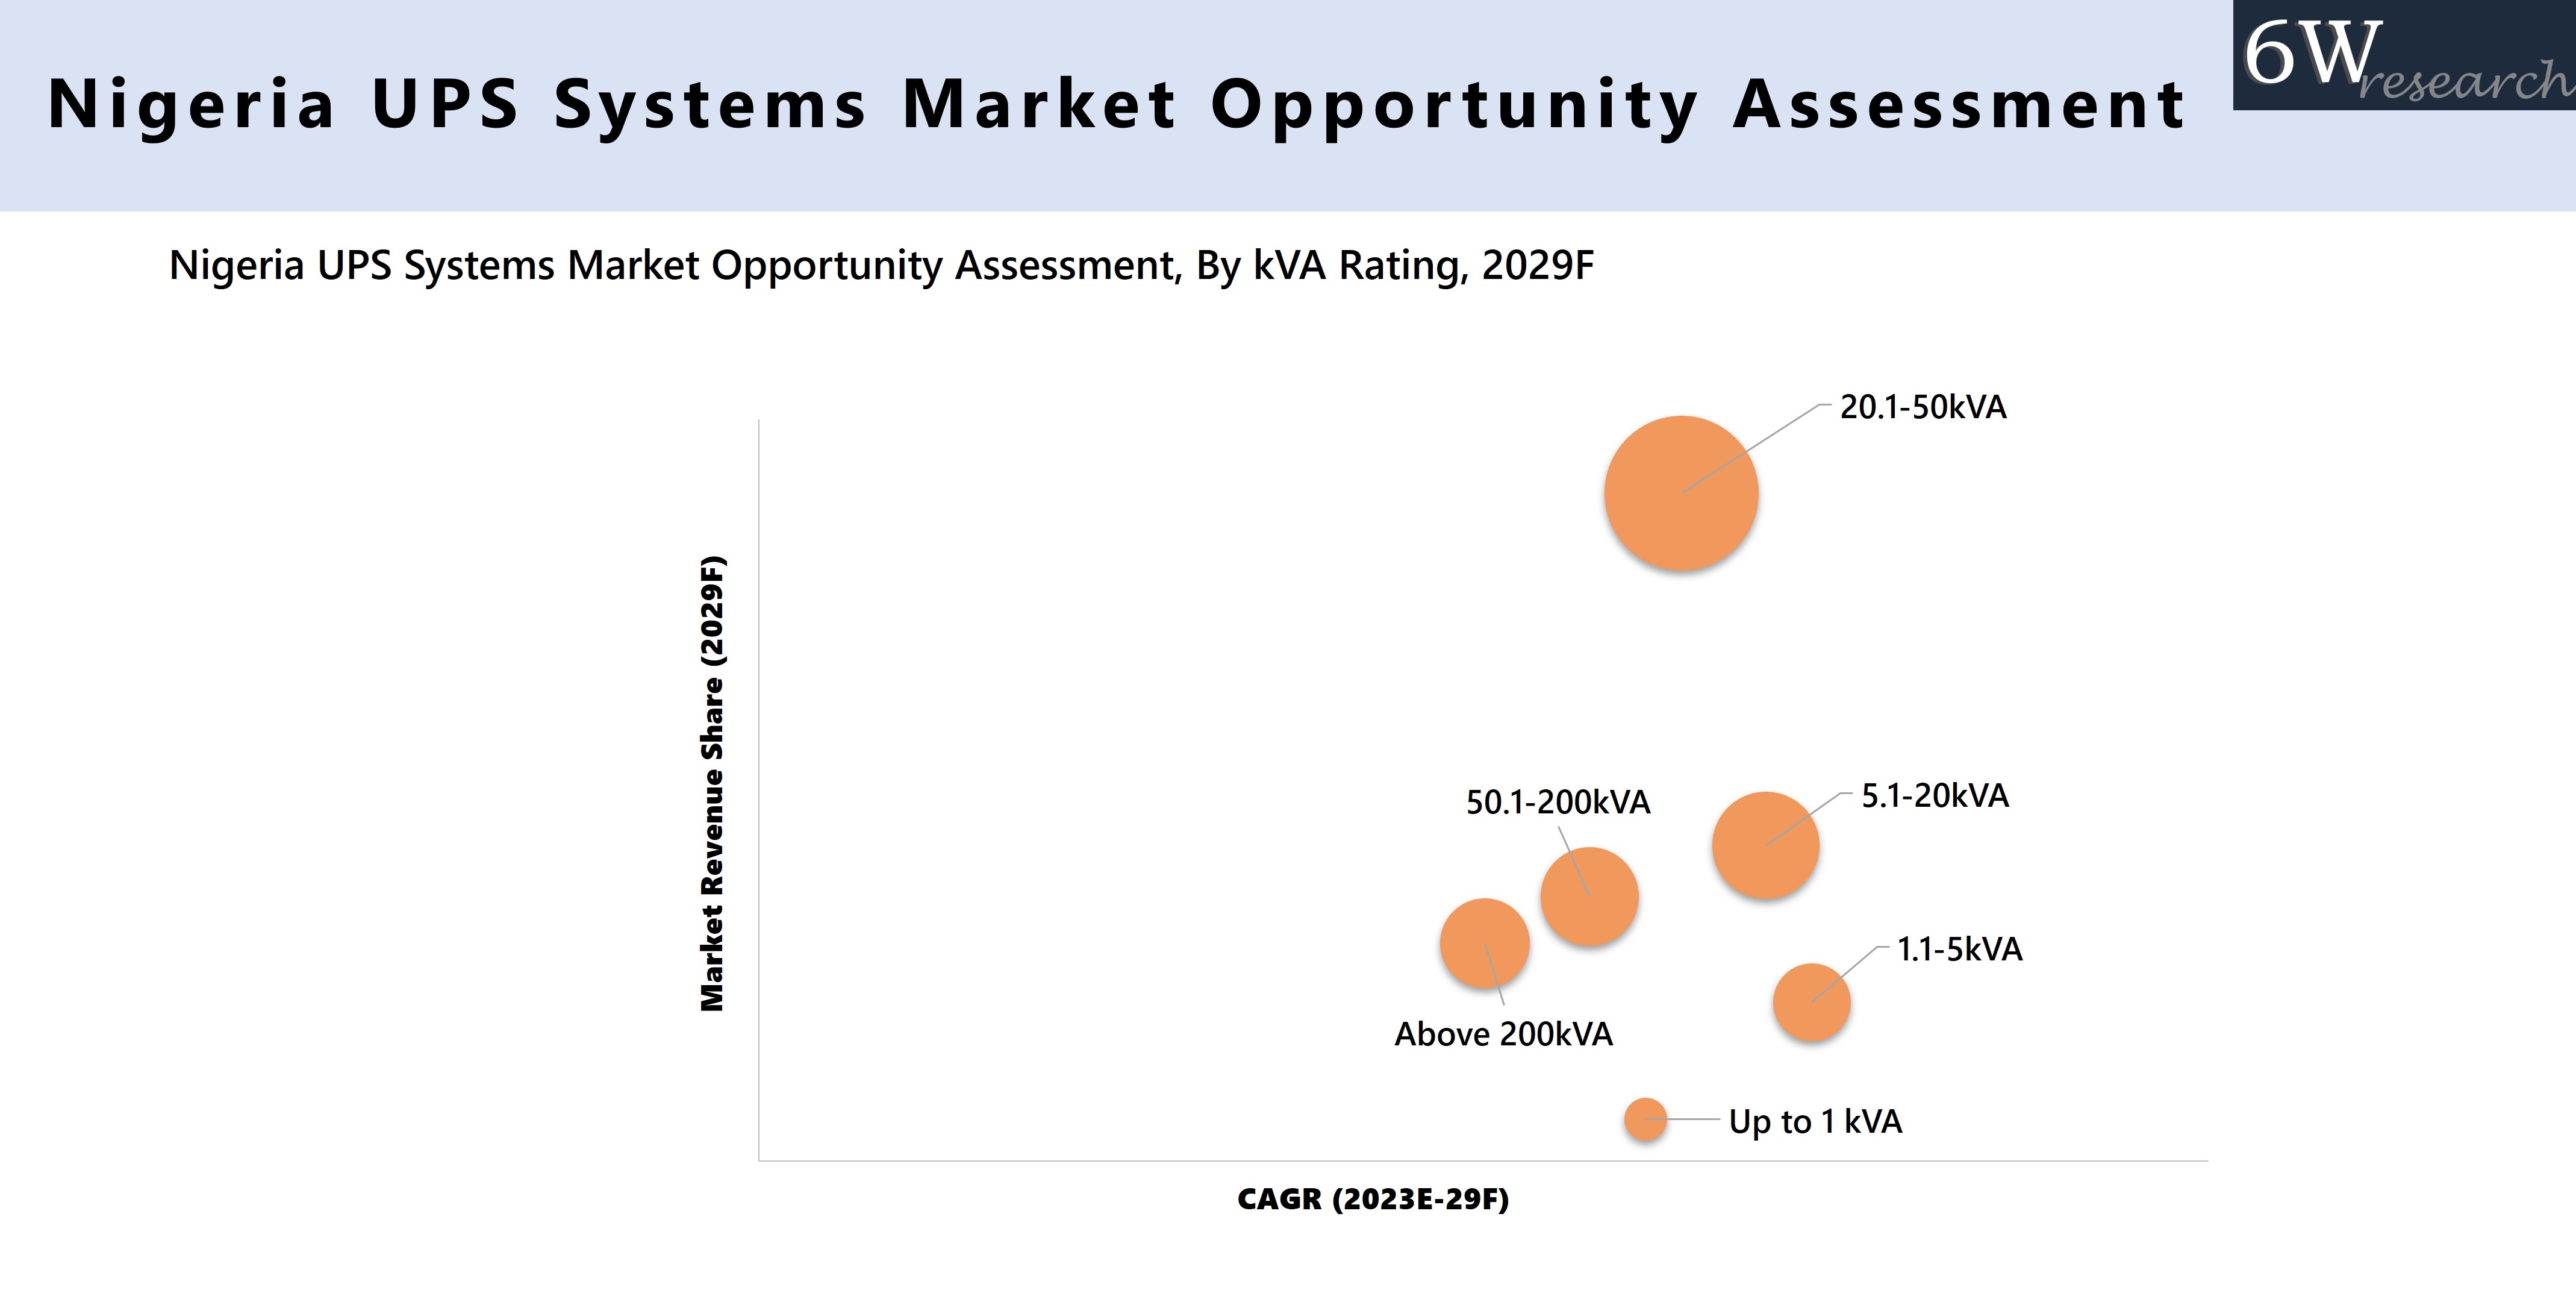 Nigeria UPS Systems Market Opportunity Assessment